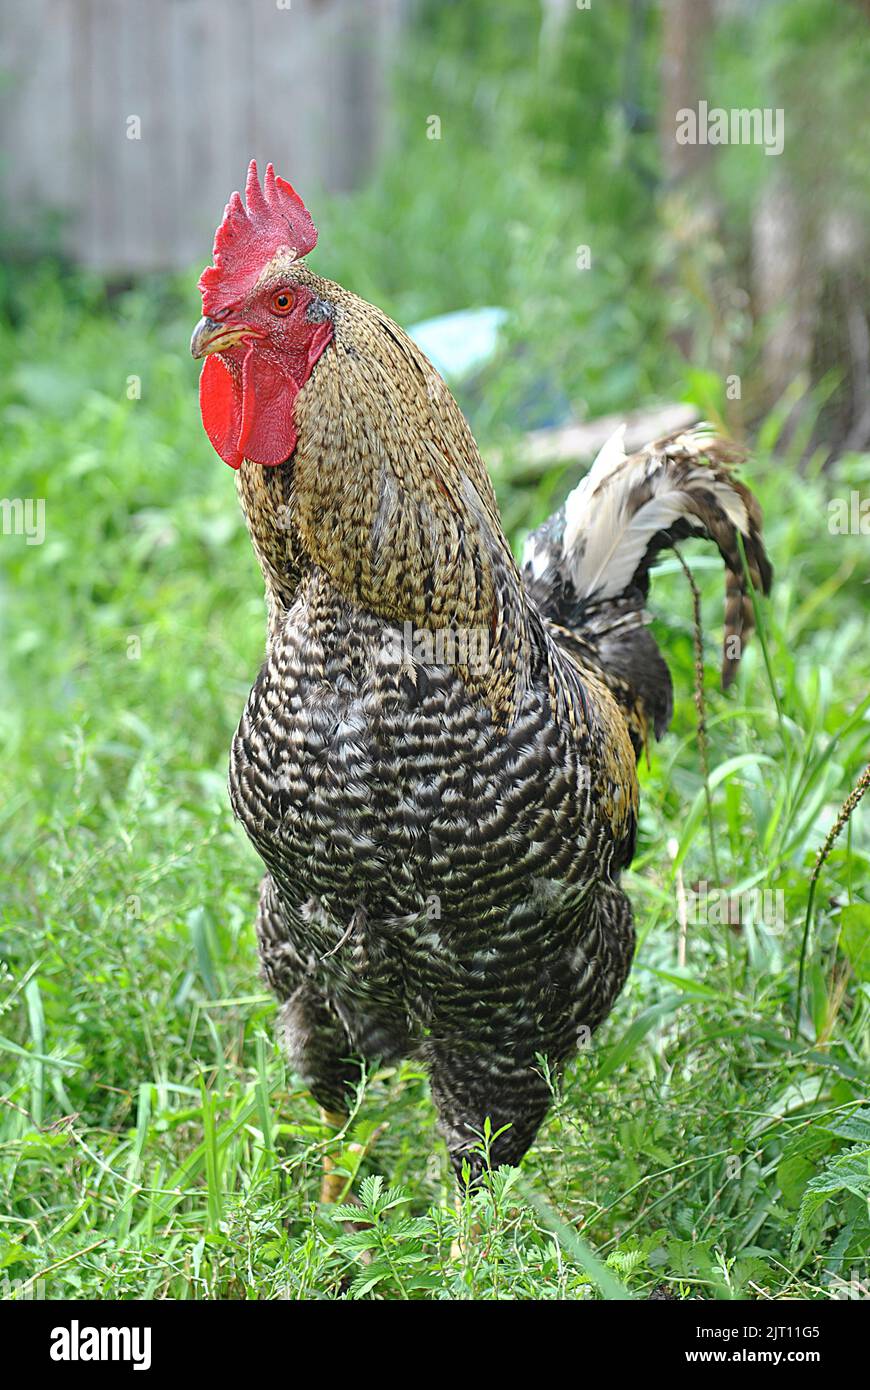 A vertical closeup of a rooster at a farm Stock Photo